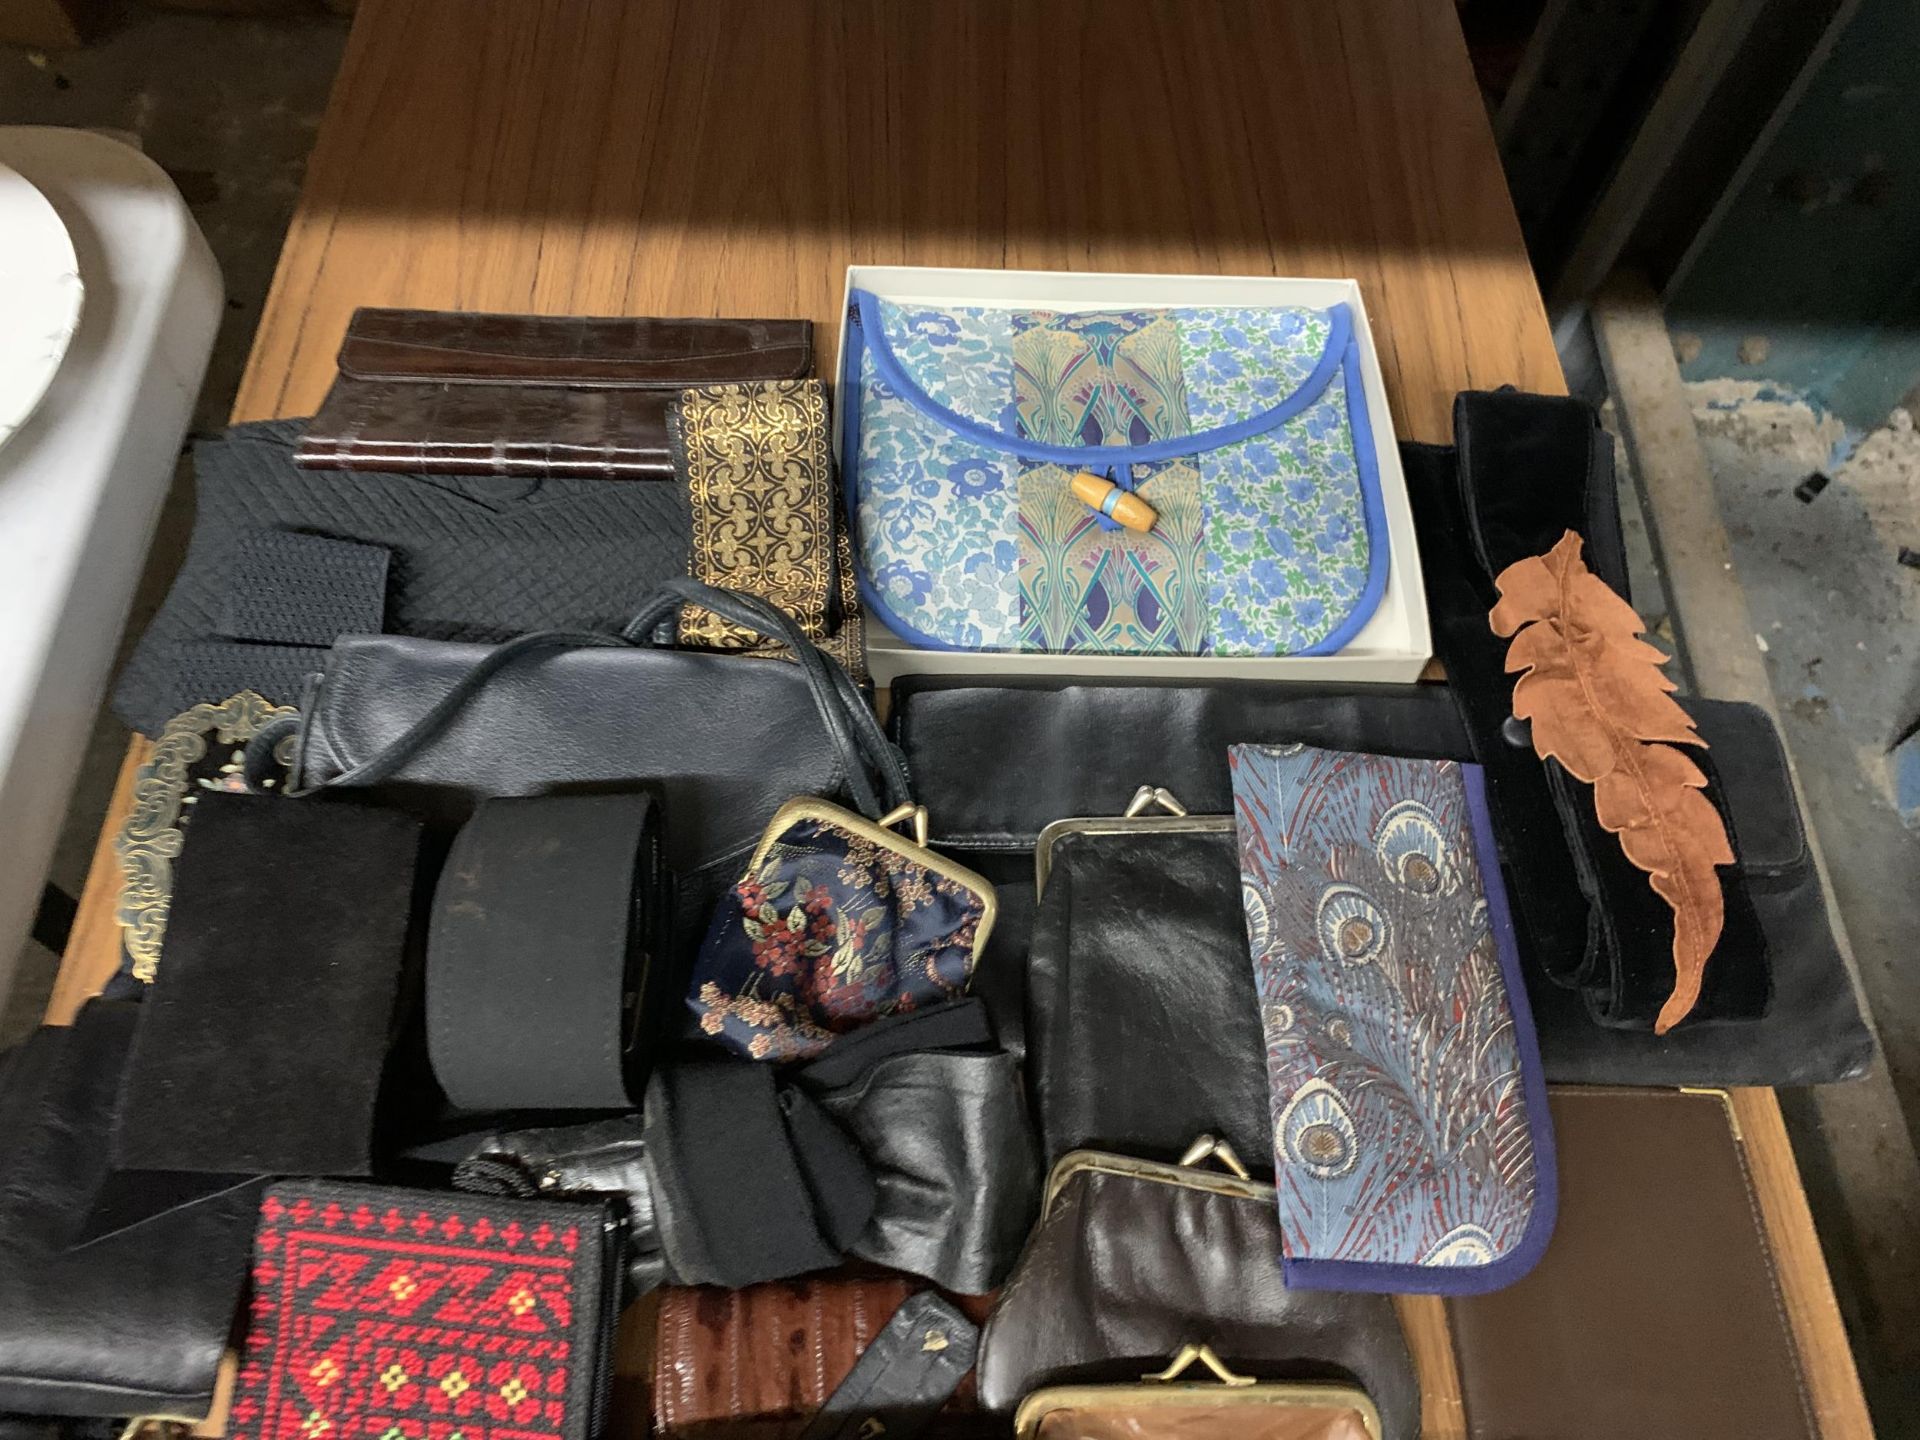 A LARGE QUANTITY OF VINTAGE PURSES, BELTS, VANITY ITEMS, ETC, SOME LEATHER - Image 2 of 5